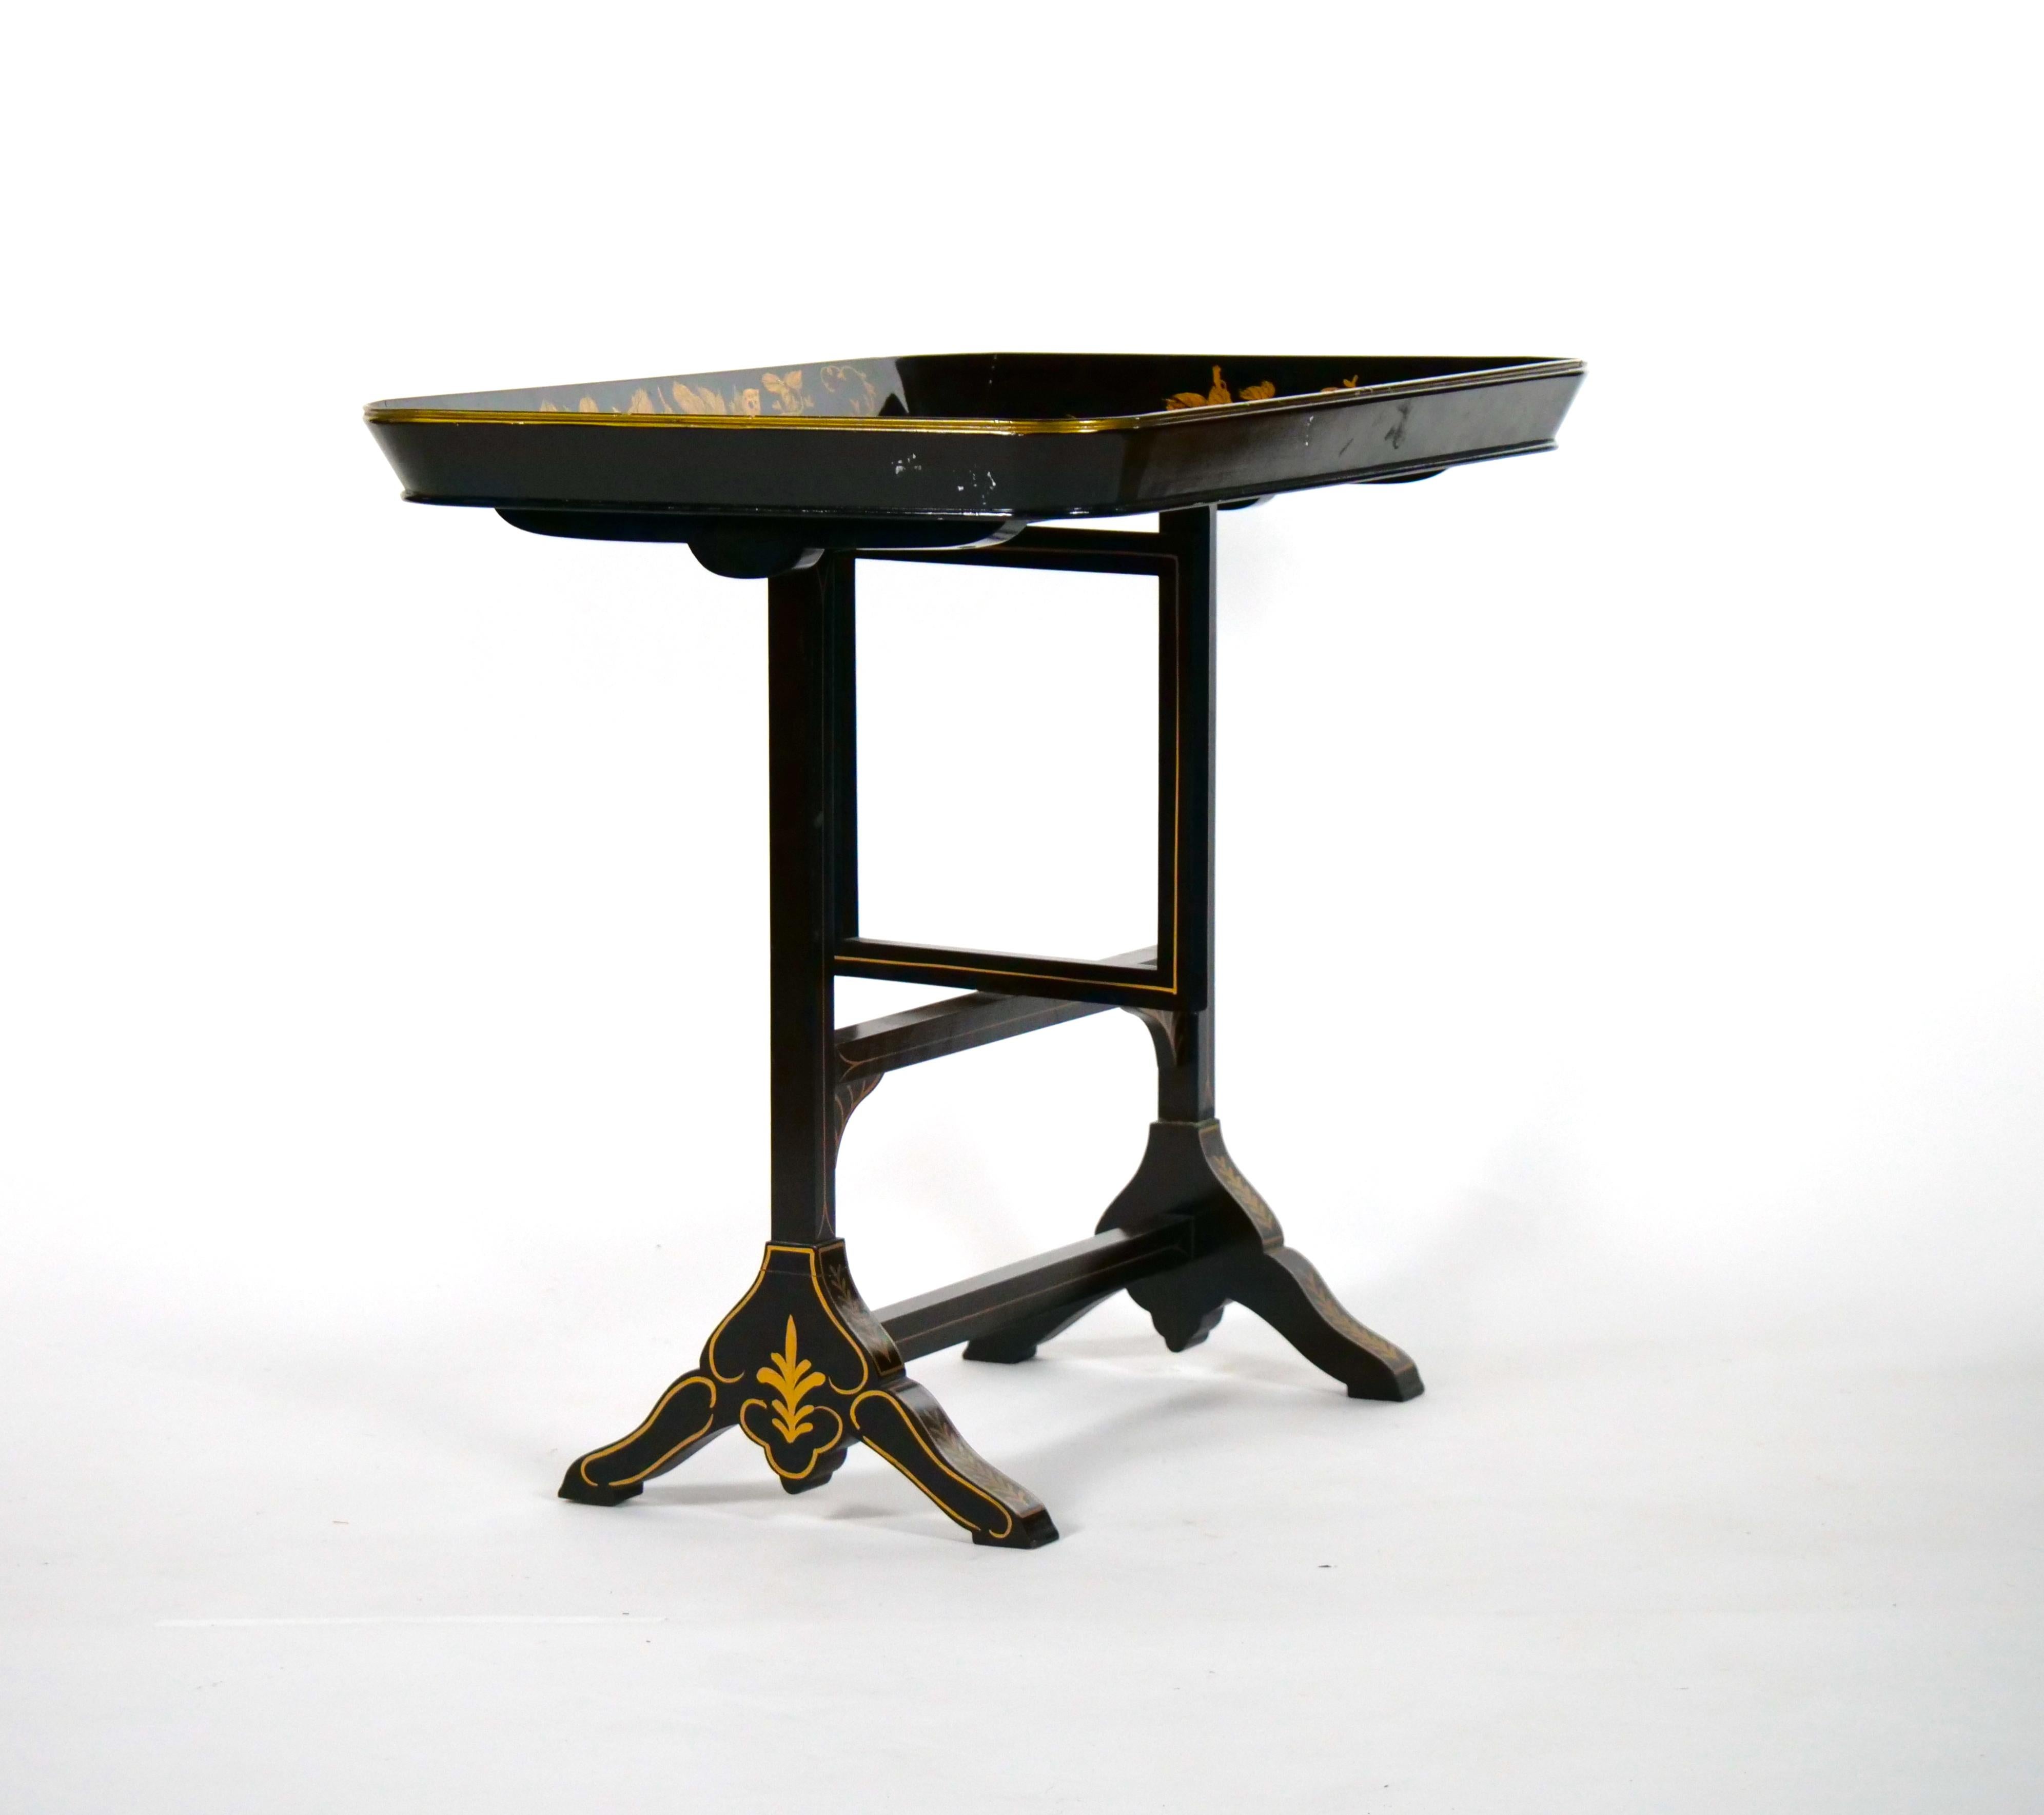 Chinoiserie Mid-20th Century Italian Lacquered / Gilt Tray Table